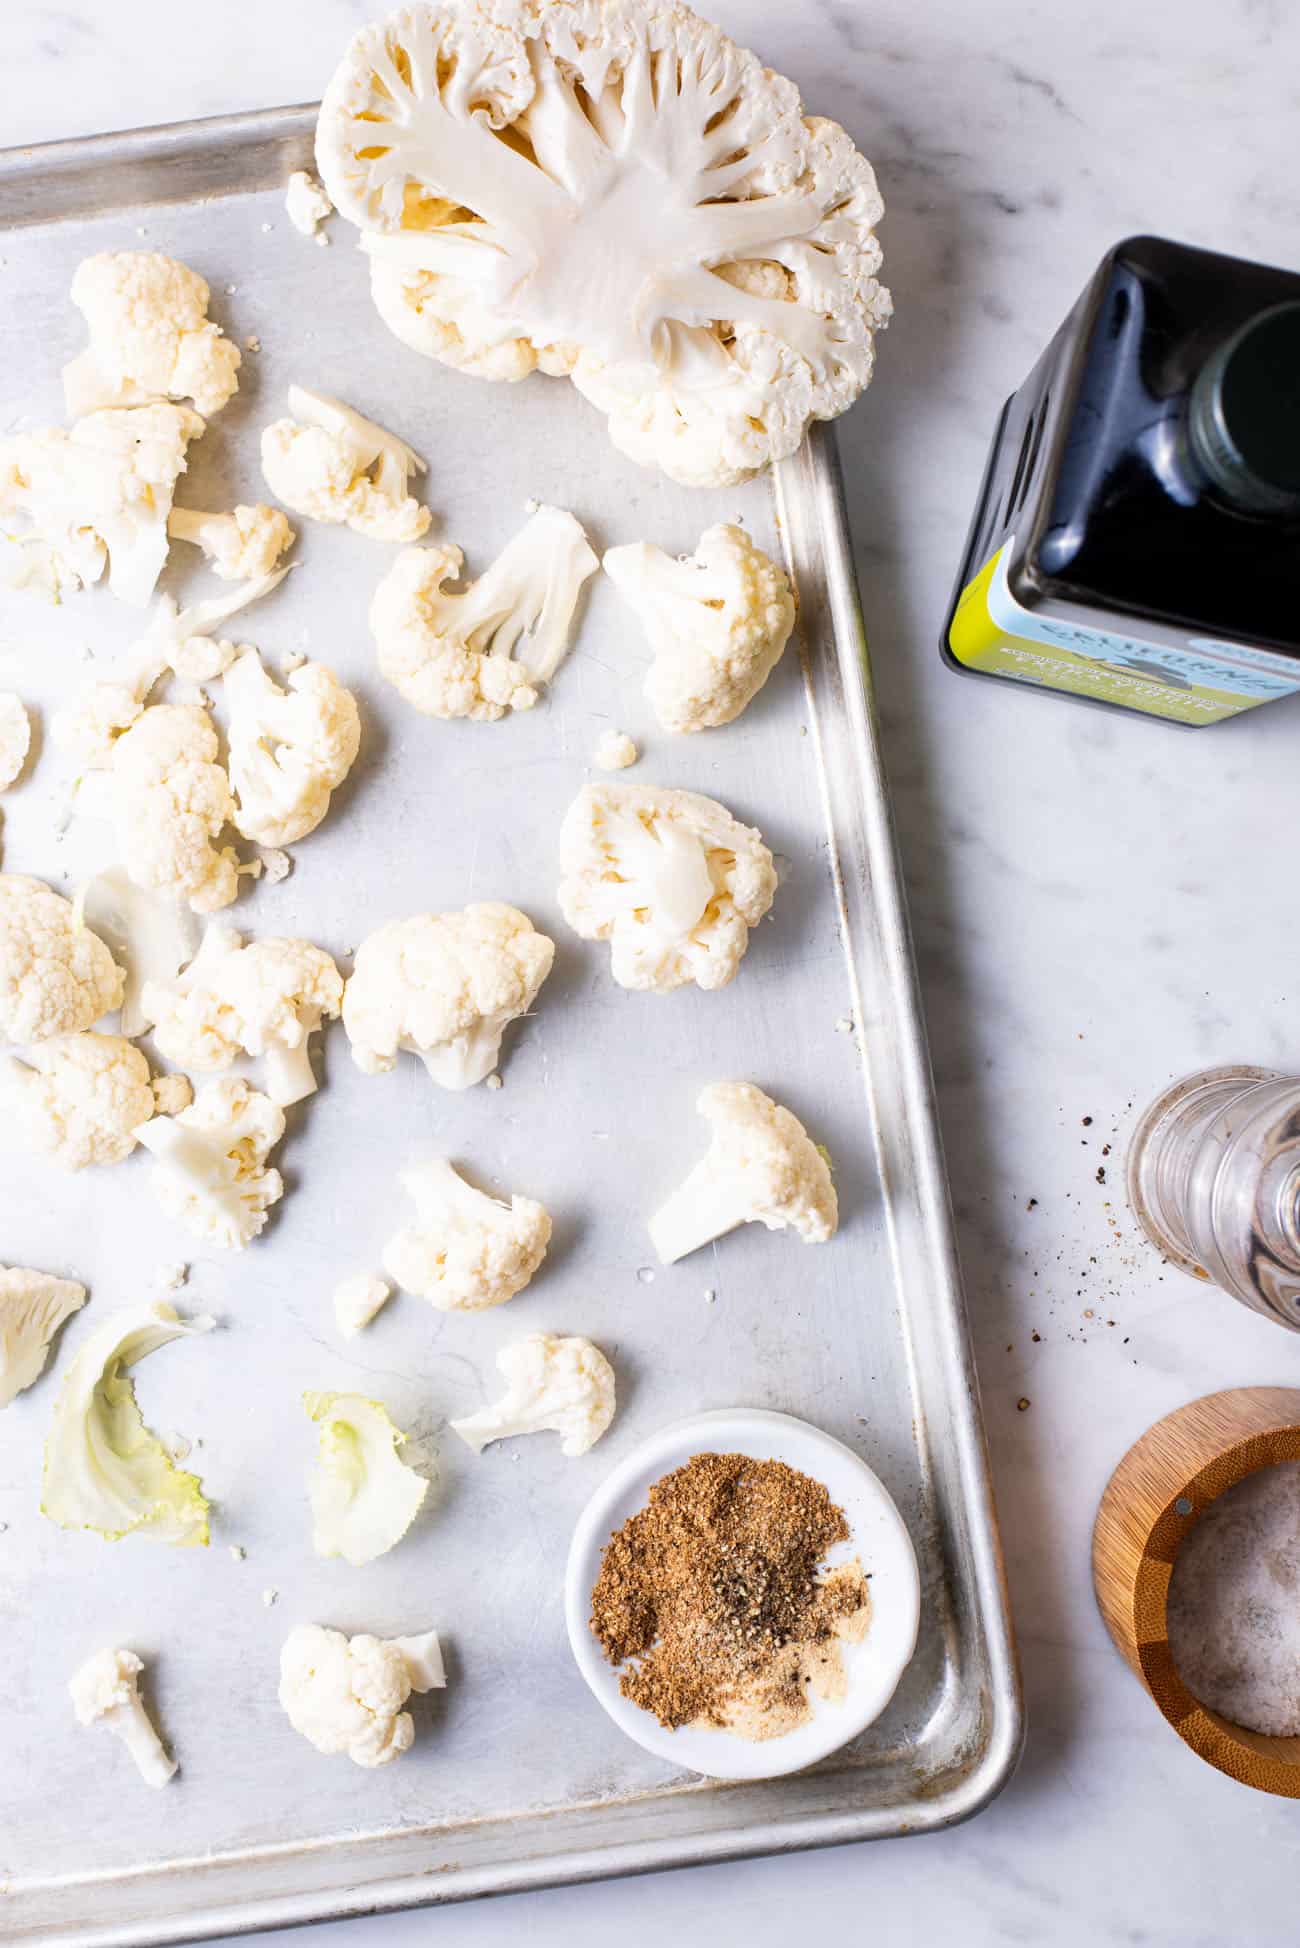 Raw cauliflower on a baking sheet next to olive oil and spices.